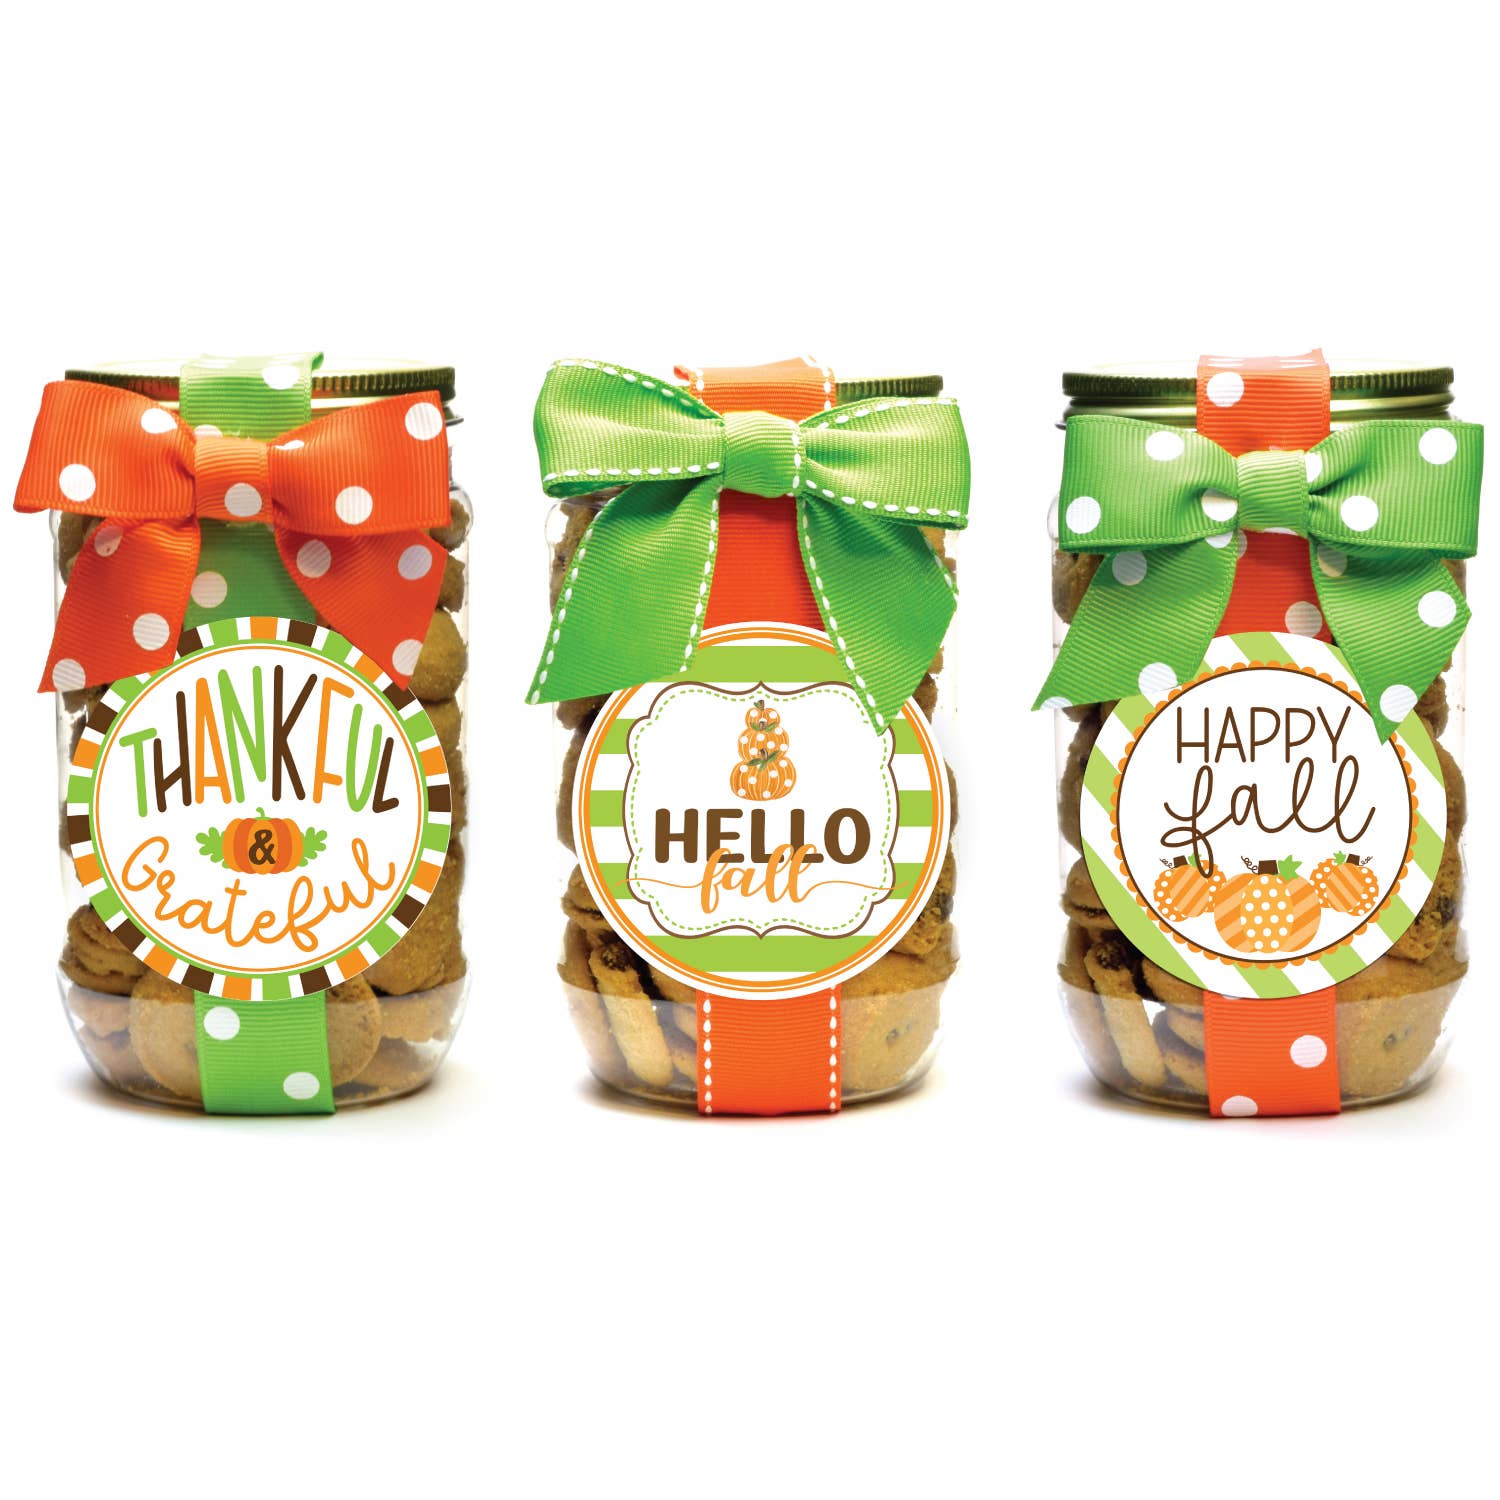 Thankful Cookies in a Jar - Mason Jar Cookies for those you're